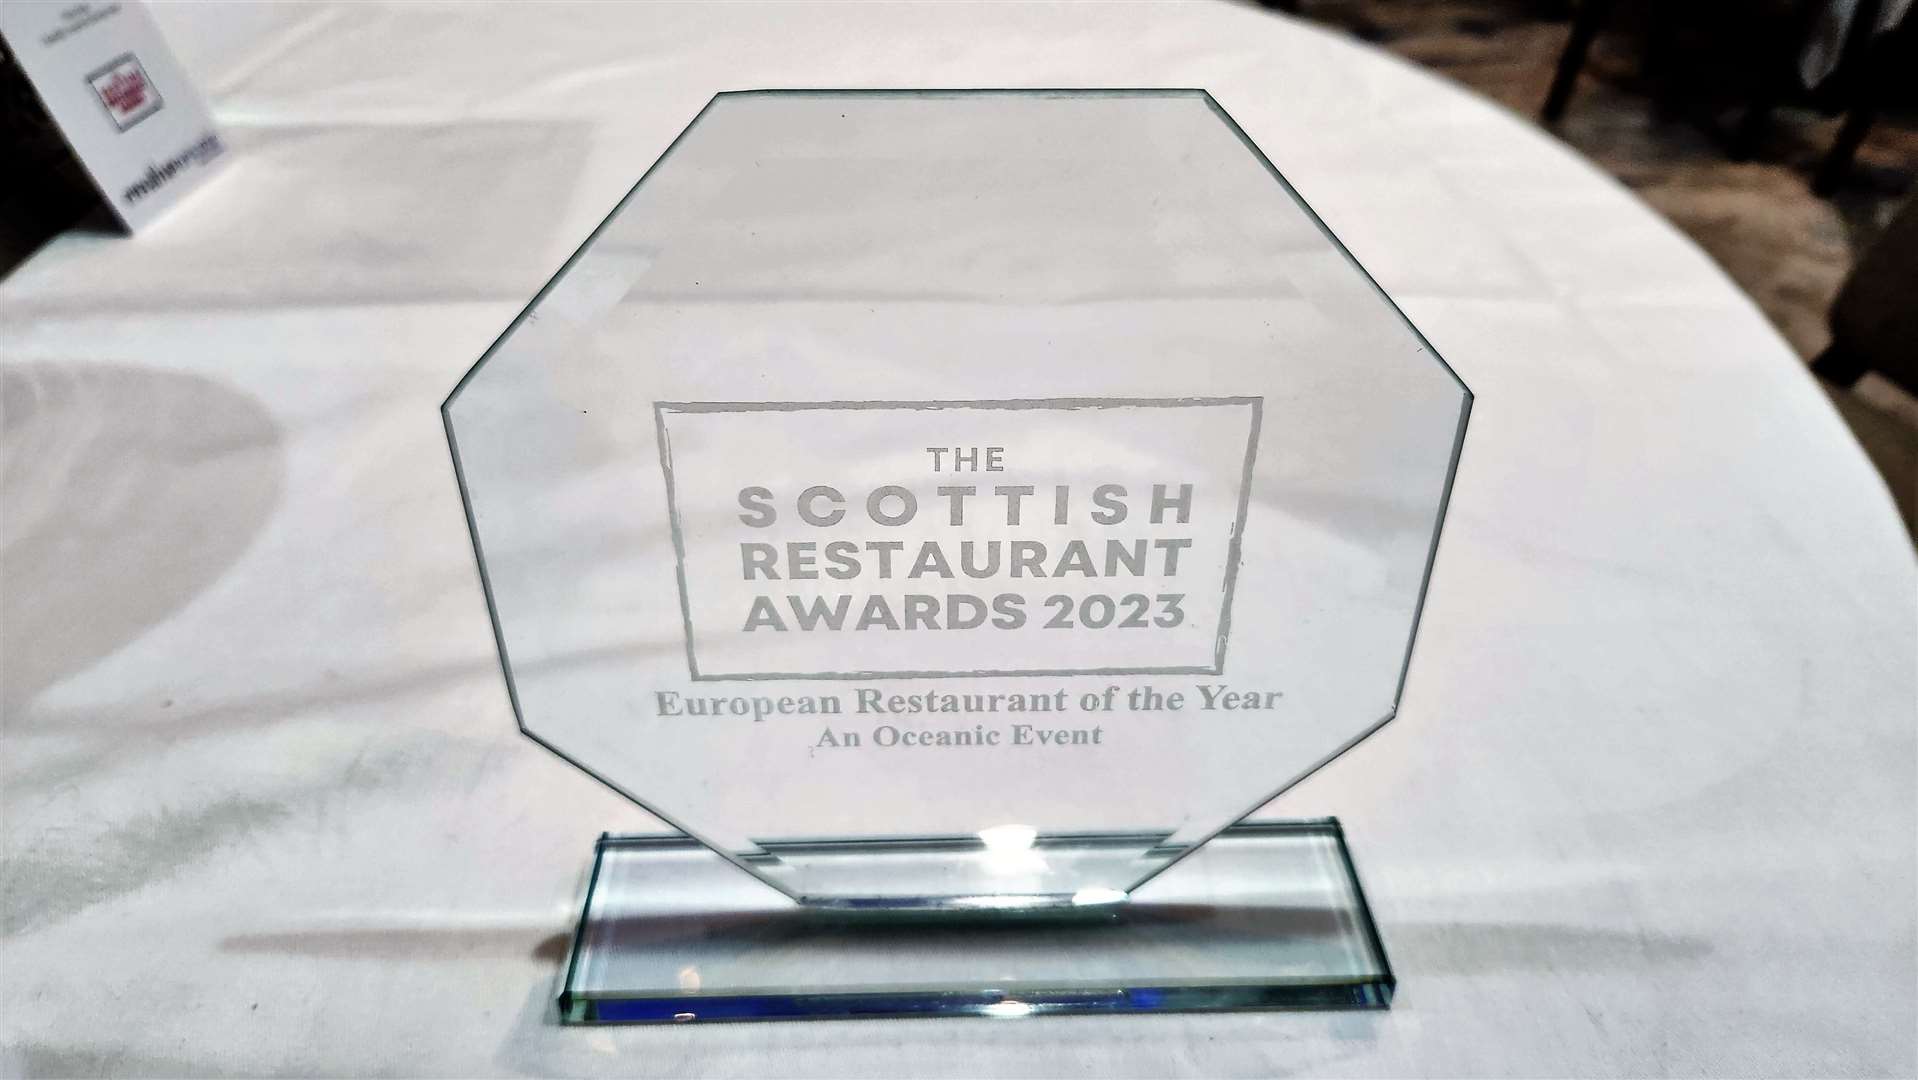 Bydand restaurant in Thurso won this special award as 'European Restaurant of the Year'. Pride of Bengal Indian Restaurant and Takeaway won a similar award.